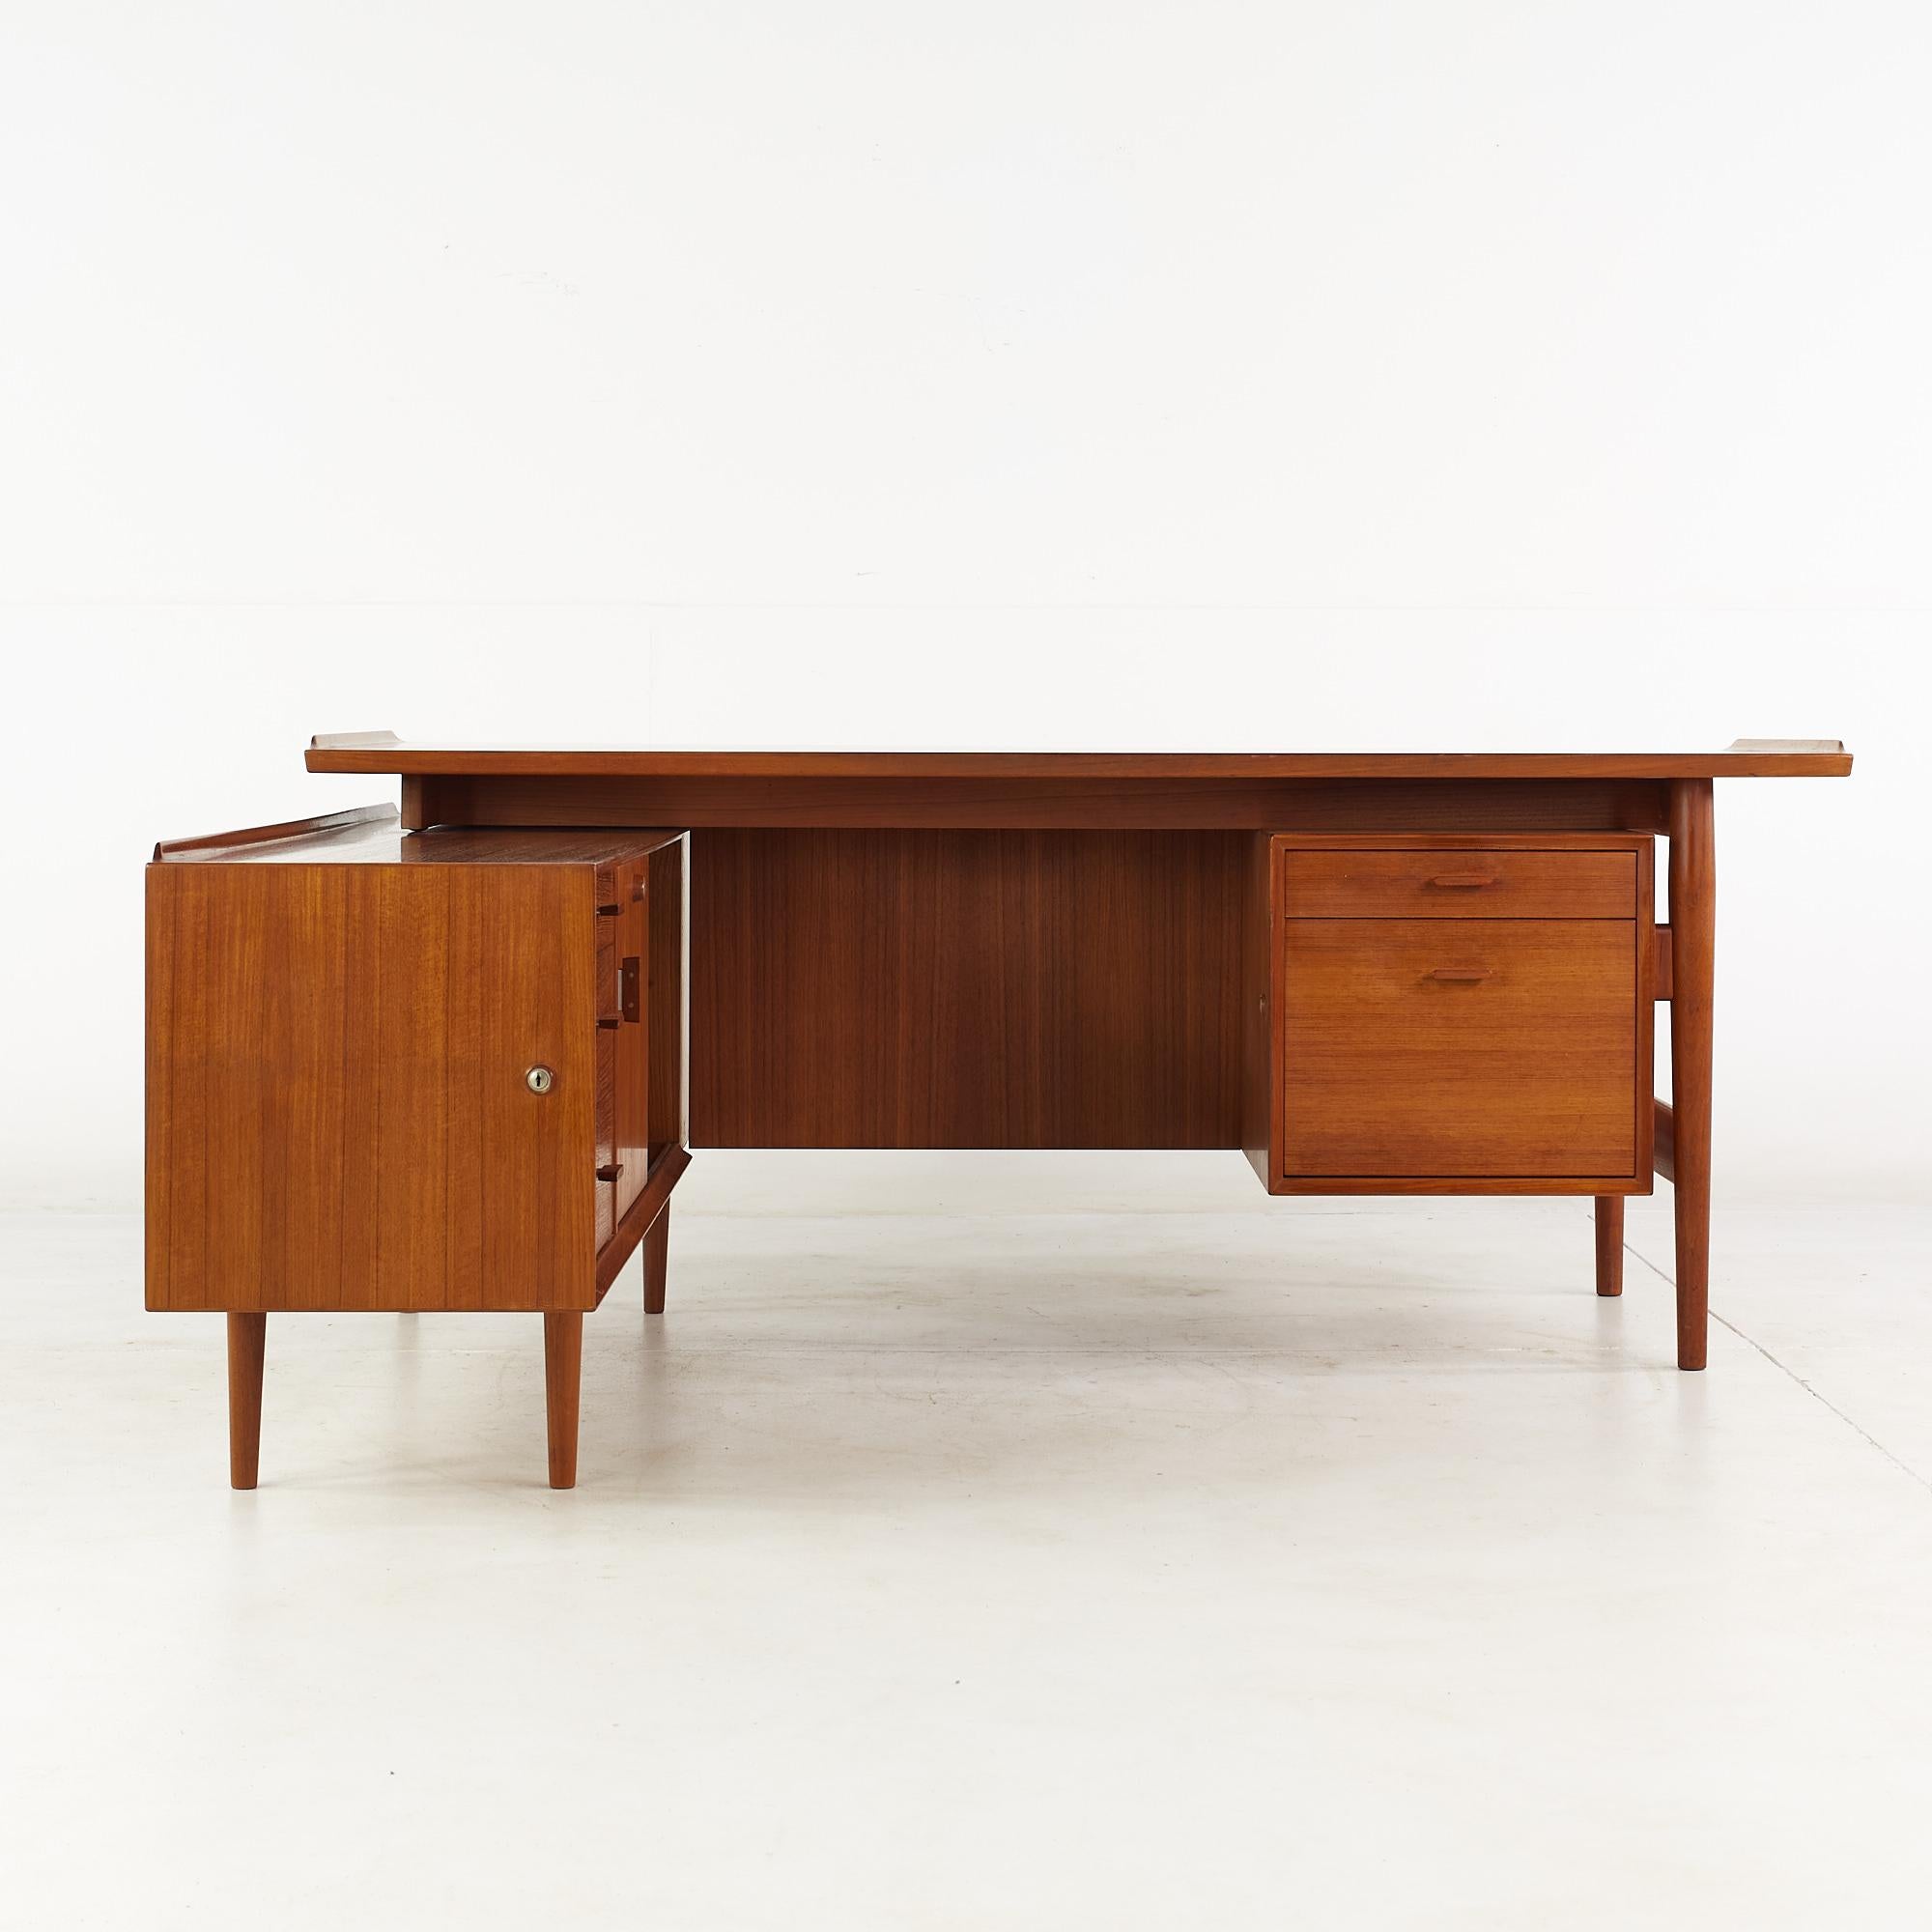 Arne Vodder for Sibast Mid Century Danish teak l shaped executive desk

This desk measures: 70.5 wide x 31 deep x 29 high, with a chair clearance of 27 inches
The return measures: 65 wide x 16.75 deep x 25 inches high

All pieces of furniture